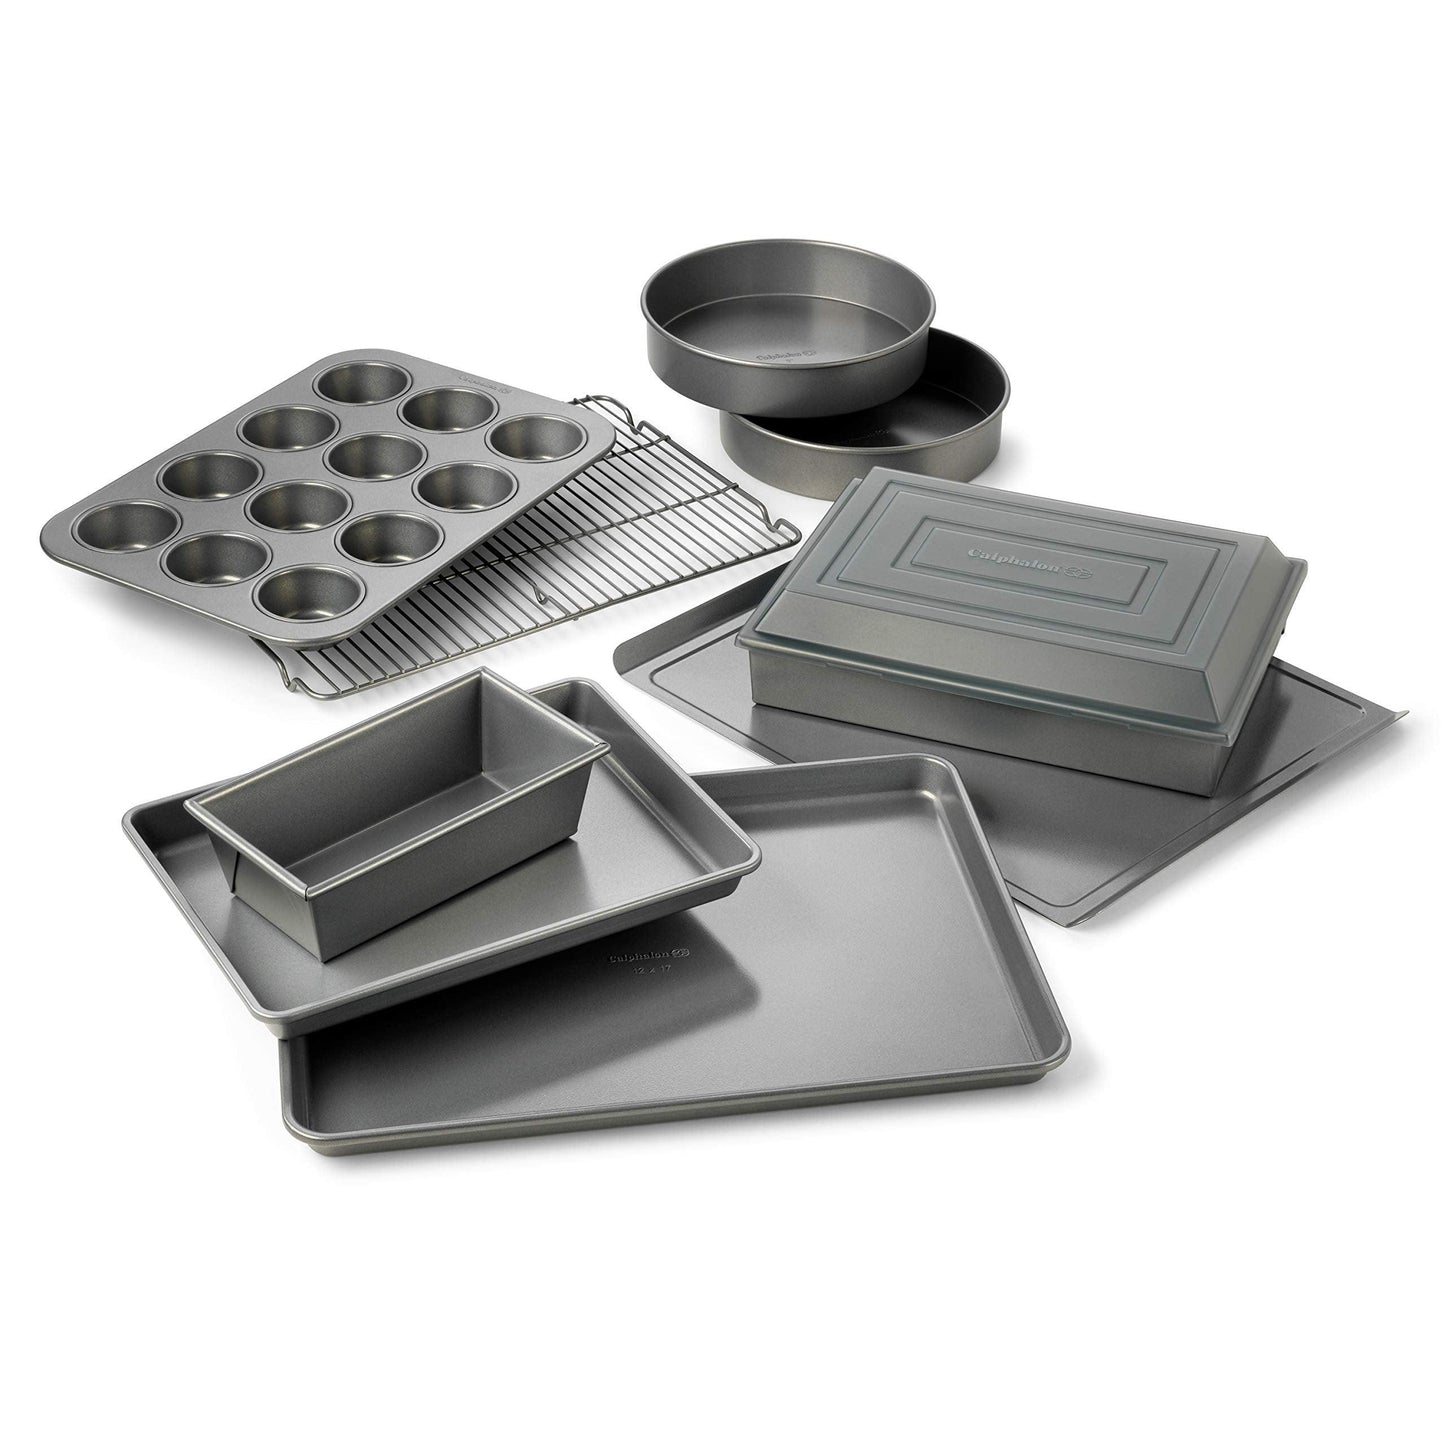 Calphalon Nonstick Bakeware Set, 10-Piece Set Includes Baking Sheet, Cookie Sheet, Cake Pans, Muffin Pan, and More, Dishwasher Safe, Silver - CookCave